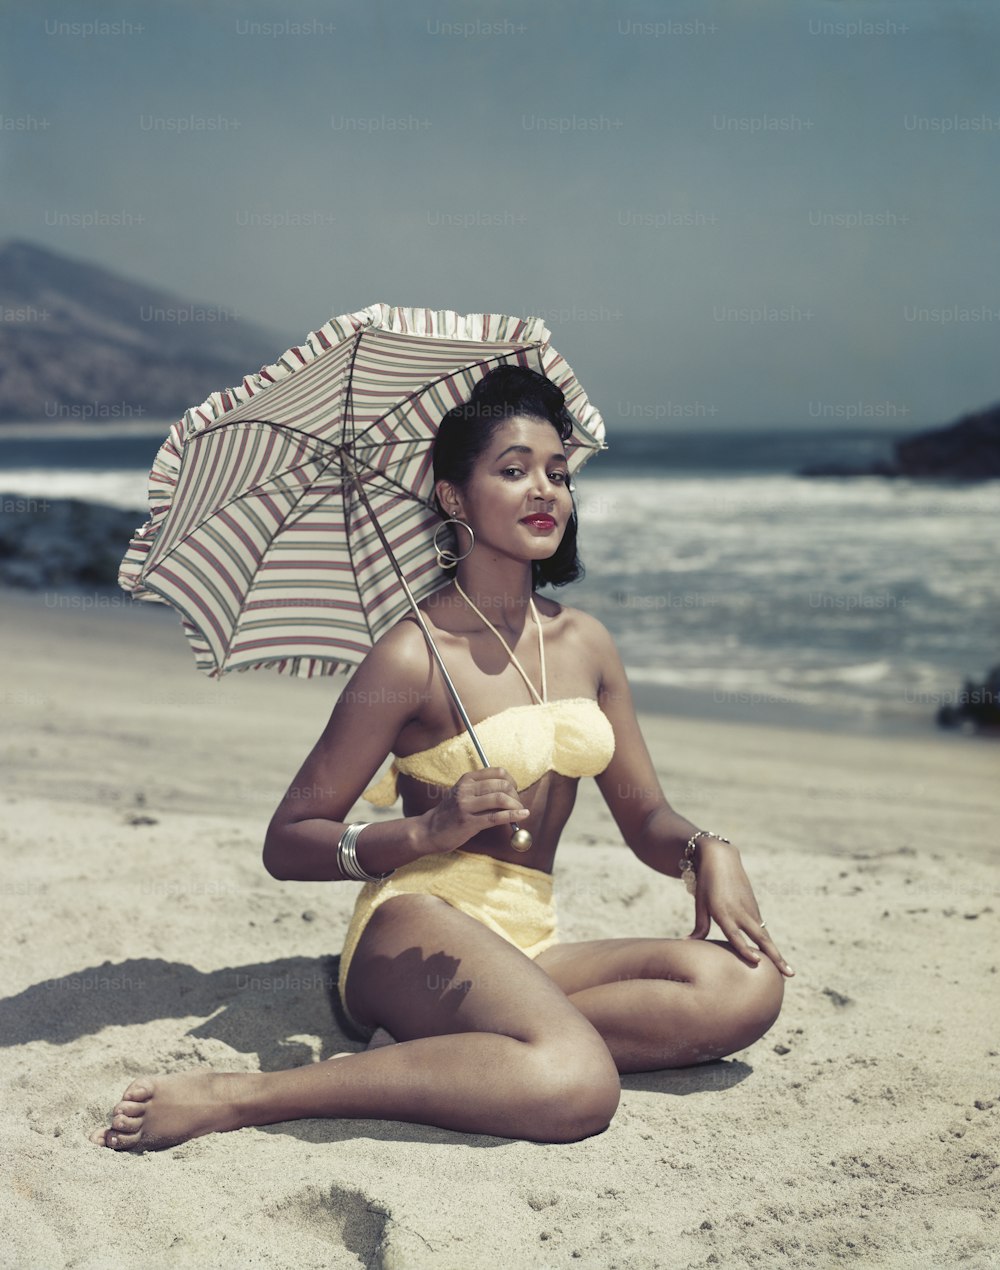 a woman sitting on the beach with an umbrella